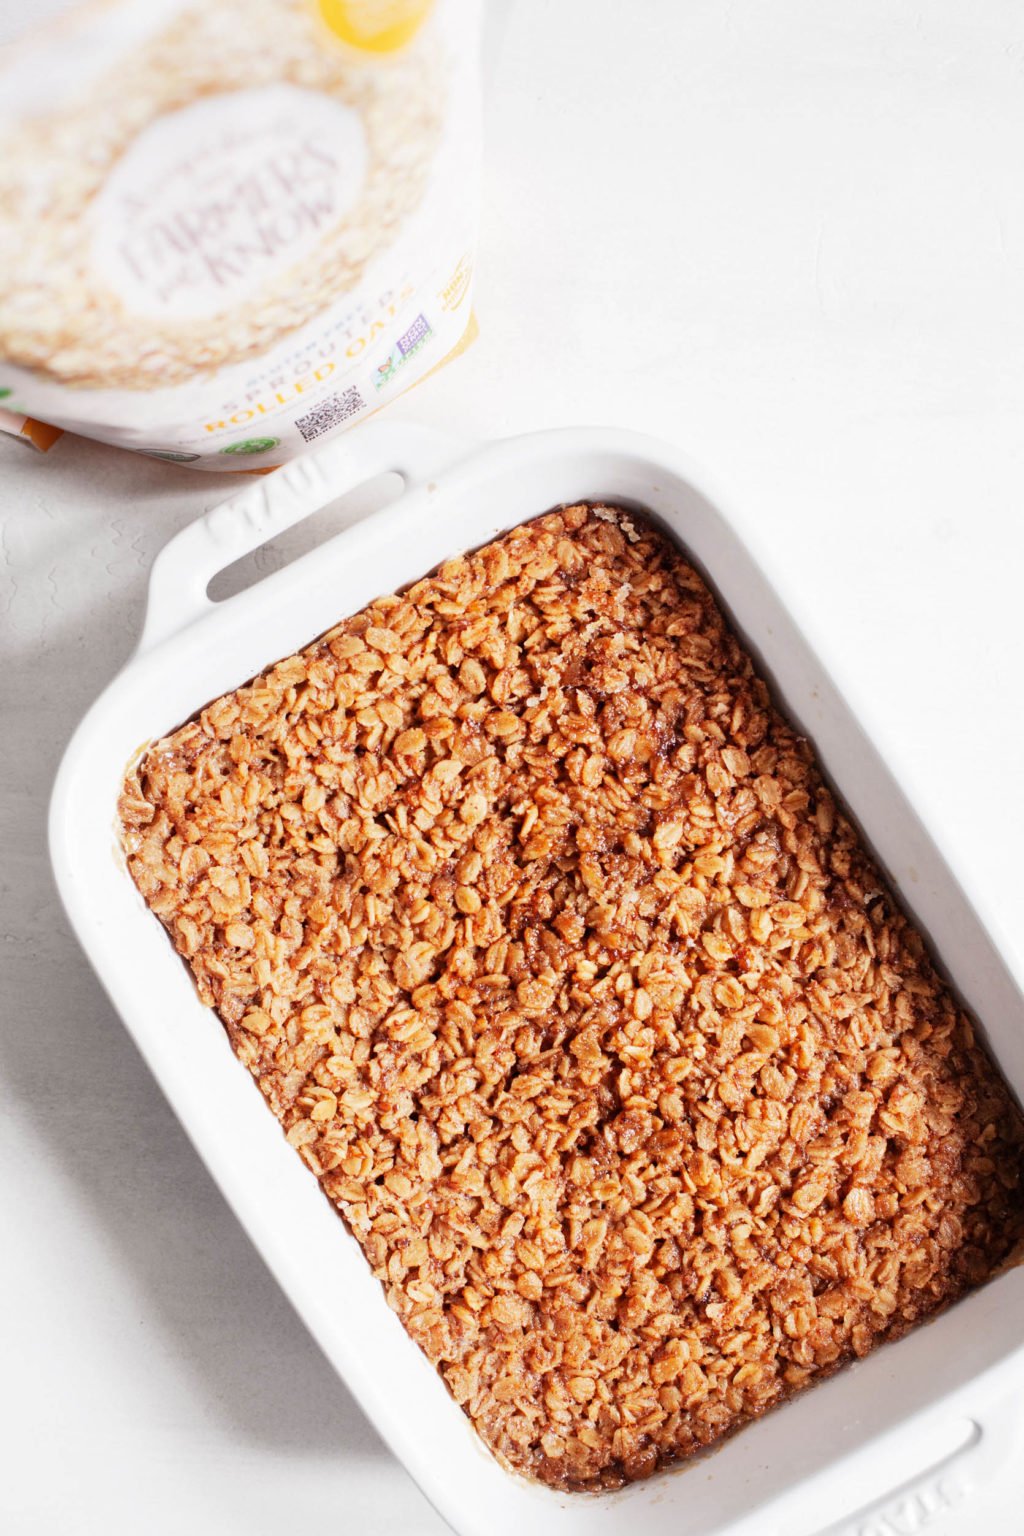 A rectangular baking dish, filled with a whole grain, plant-based breakfast.